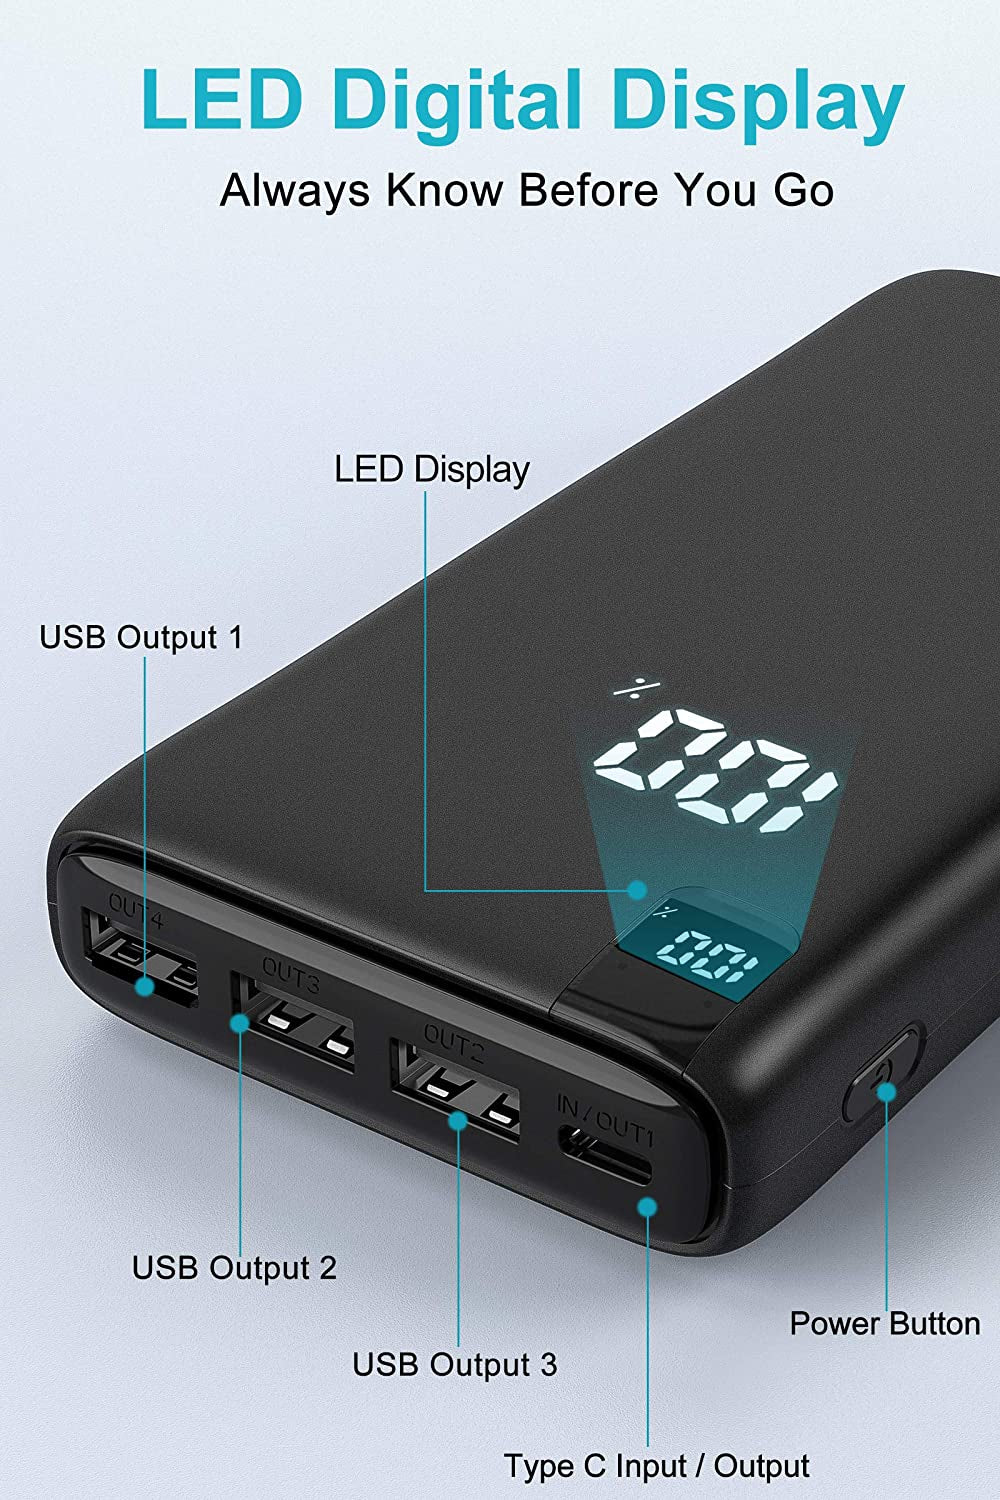 Portable Charger 26800mAh High Capacity Power Bank with LED Display and Fast Charging Outputs for iPhones, Samsung, LG, and More